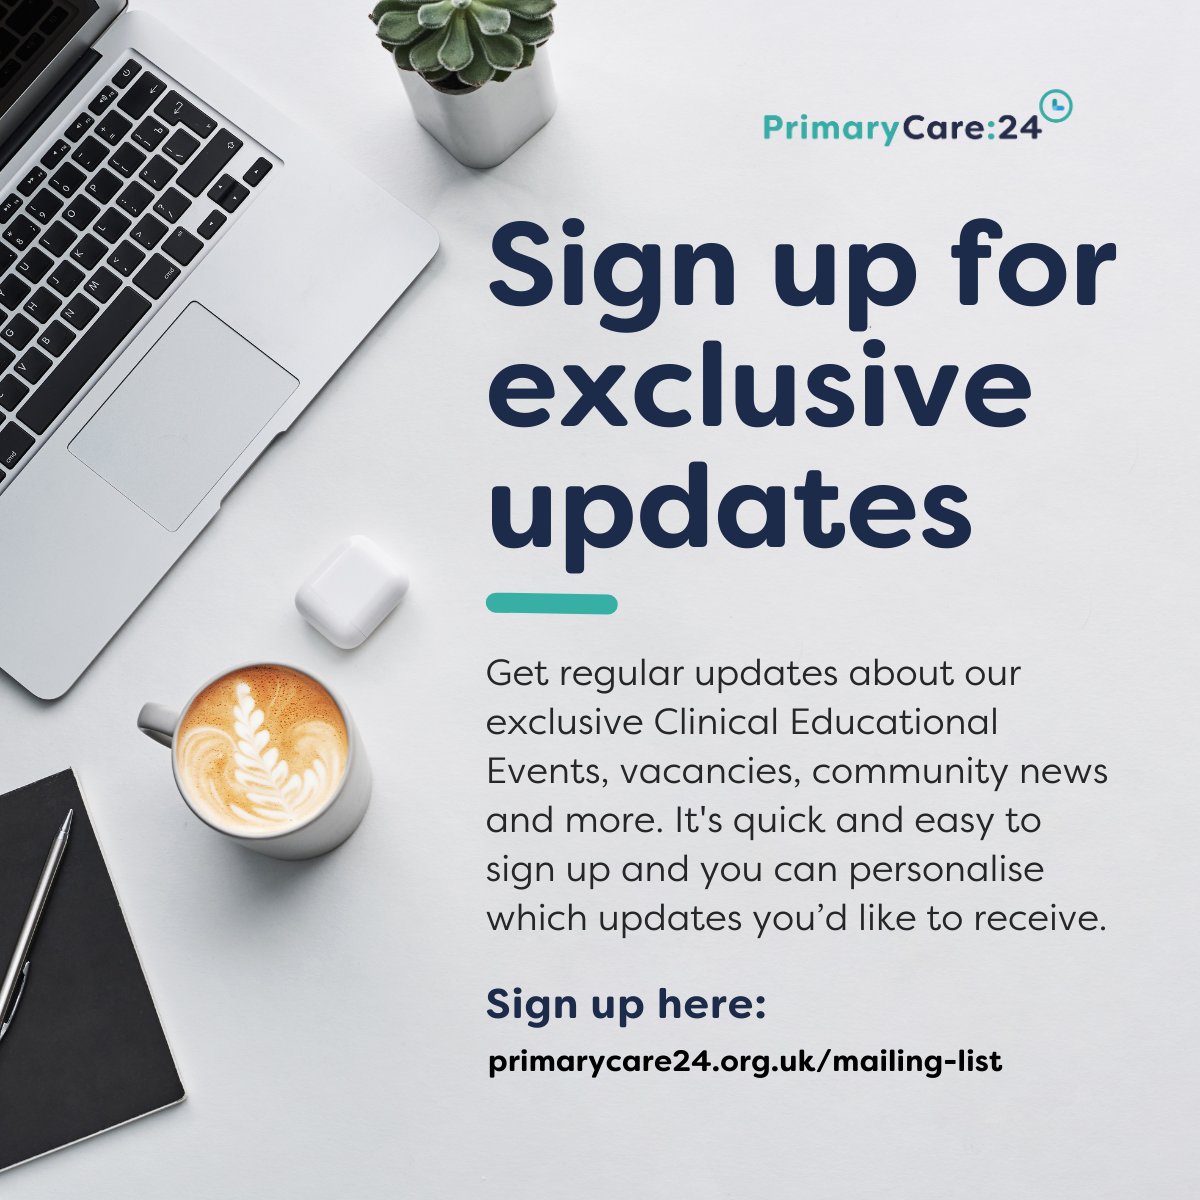 Be the first to hear about our exclusive Clinical Educational Events, vacancies, news and more. You can also personalise the updates you receive from us to make sure they are relevant to you. 
Sign up here: zurl.co/lojJ 
-
#healthcare #events #liverpooljobs #gp #gpjobs